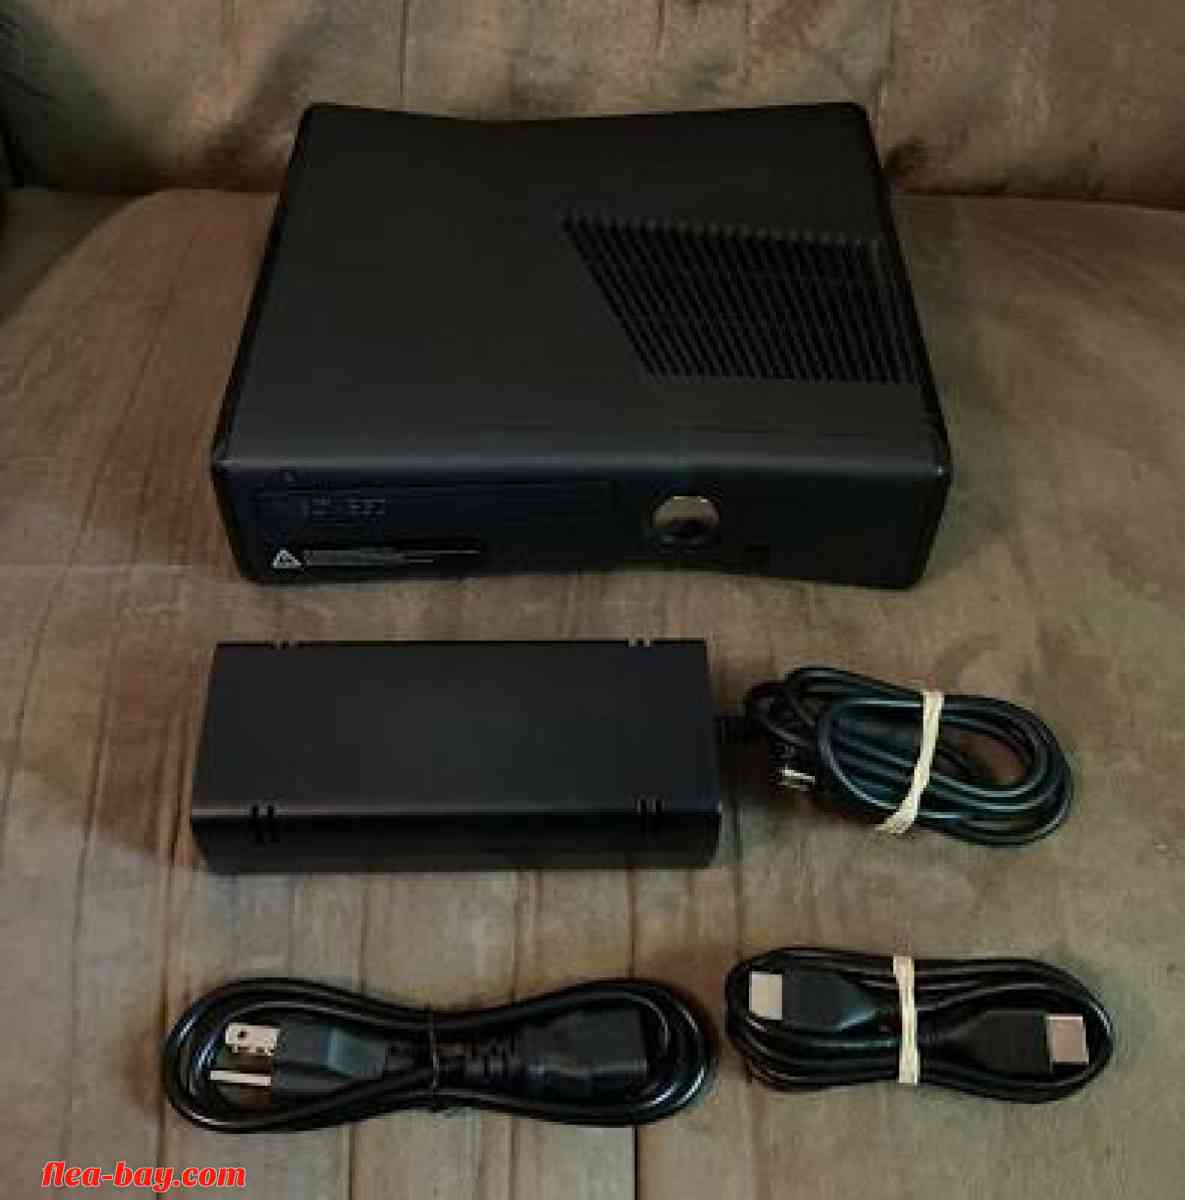 Xbox360 for sale